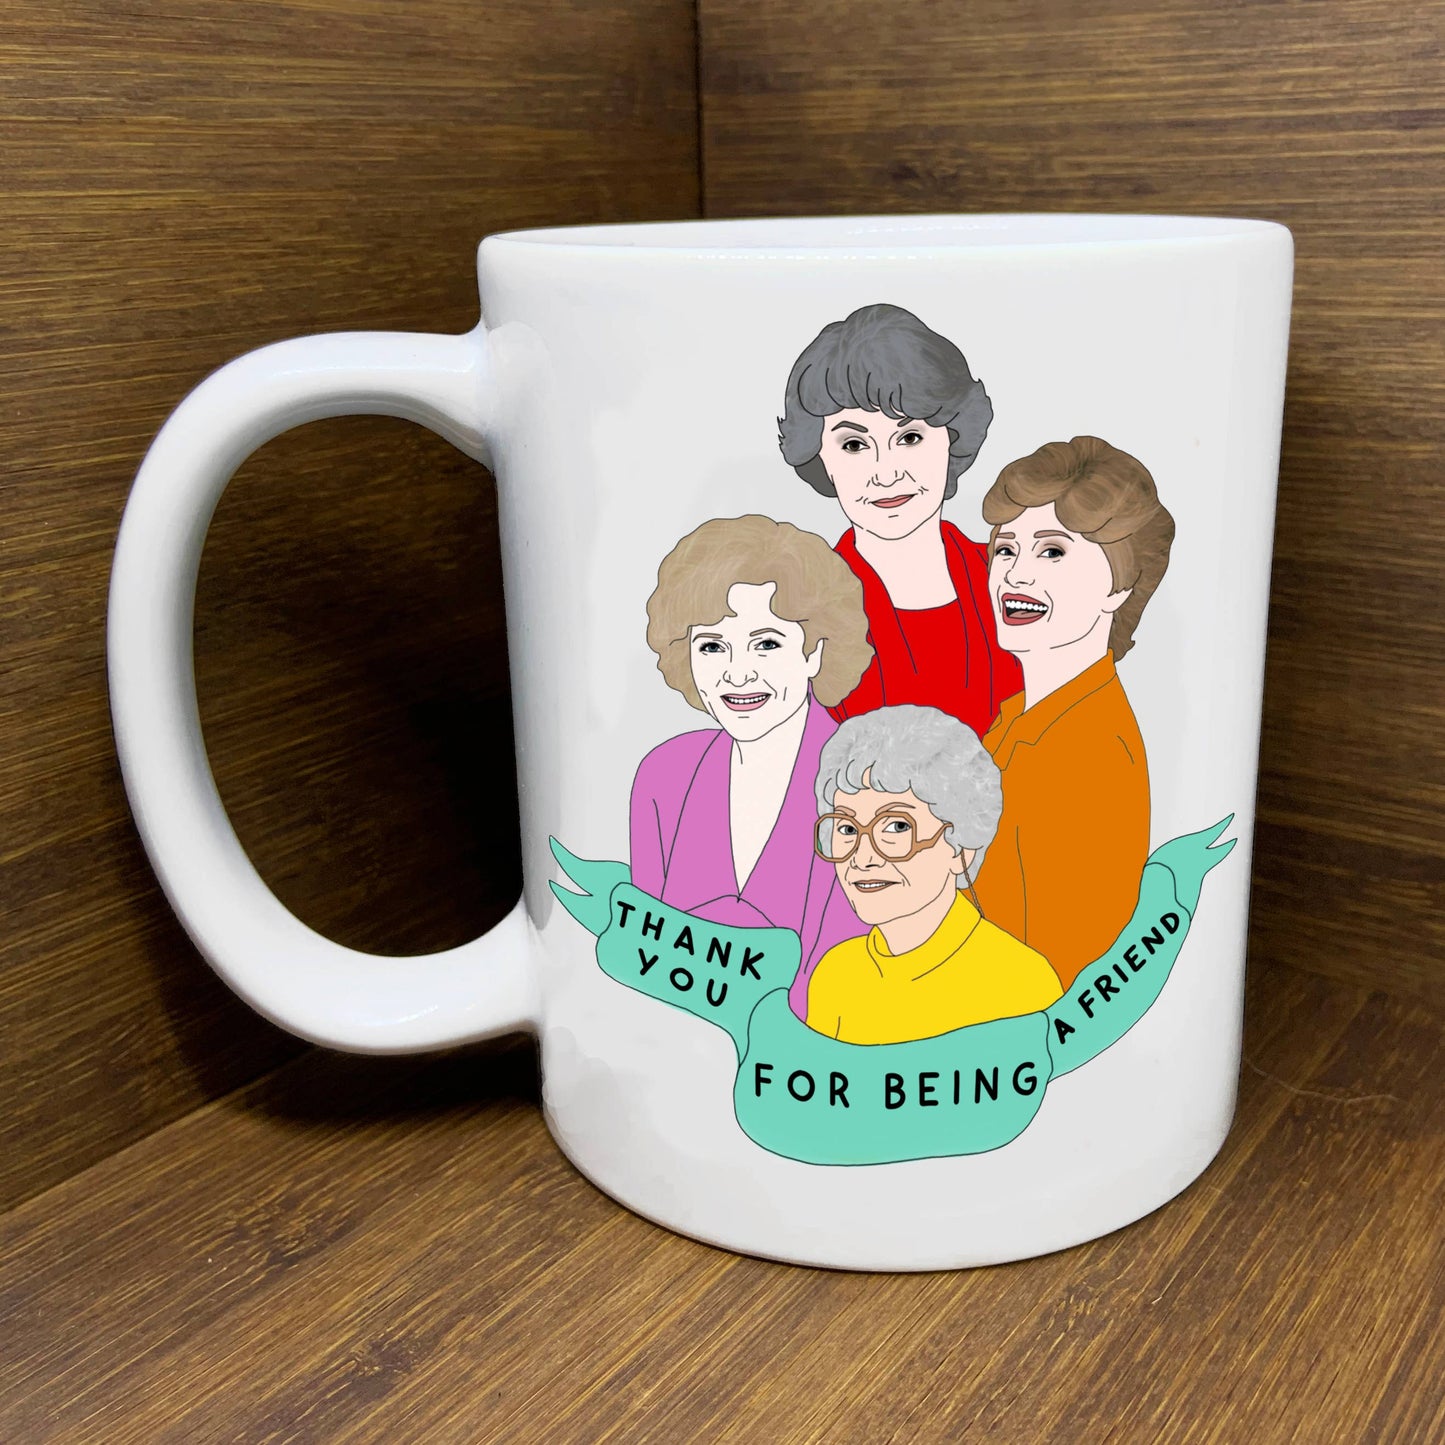 Thank You For Being A Friend Mug